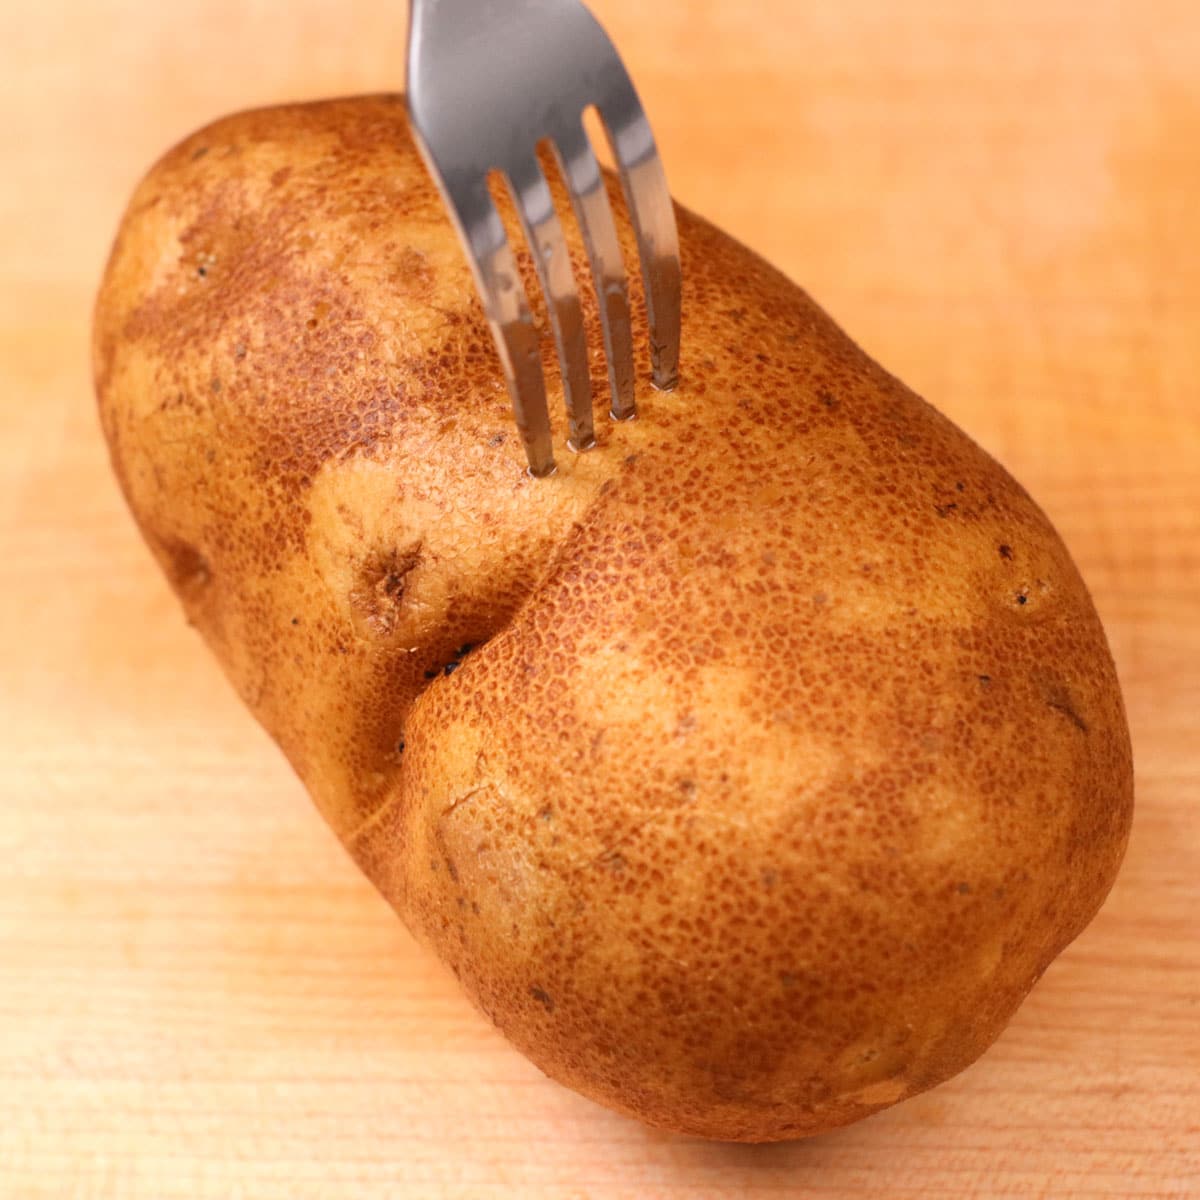 Poking potato with a fork